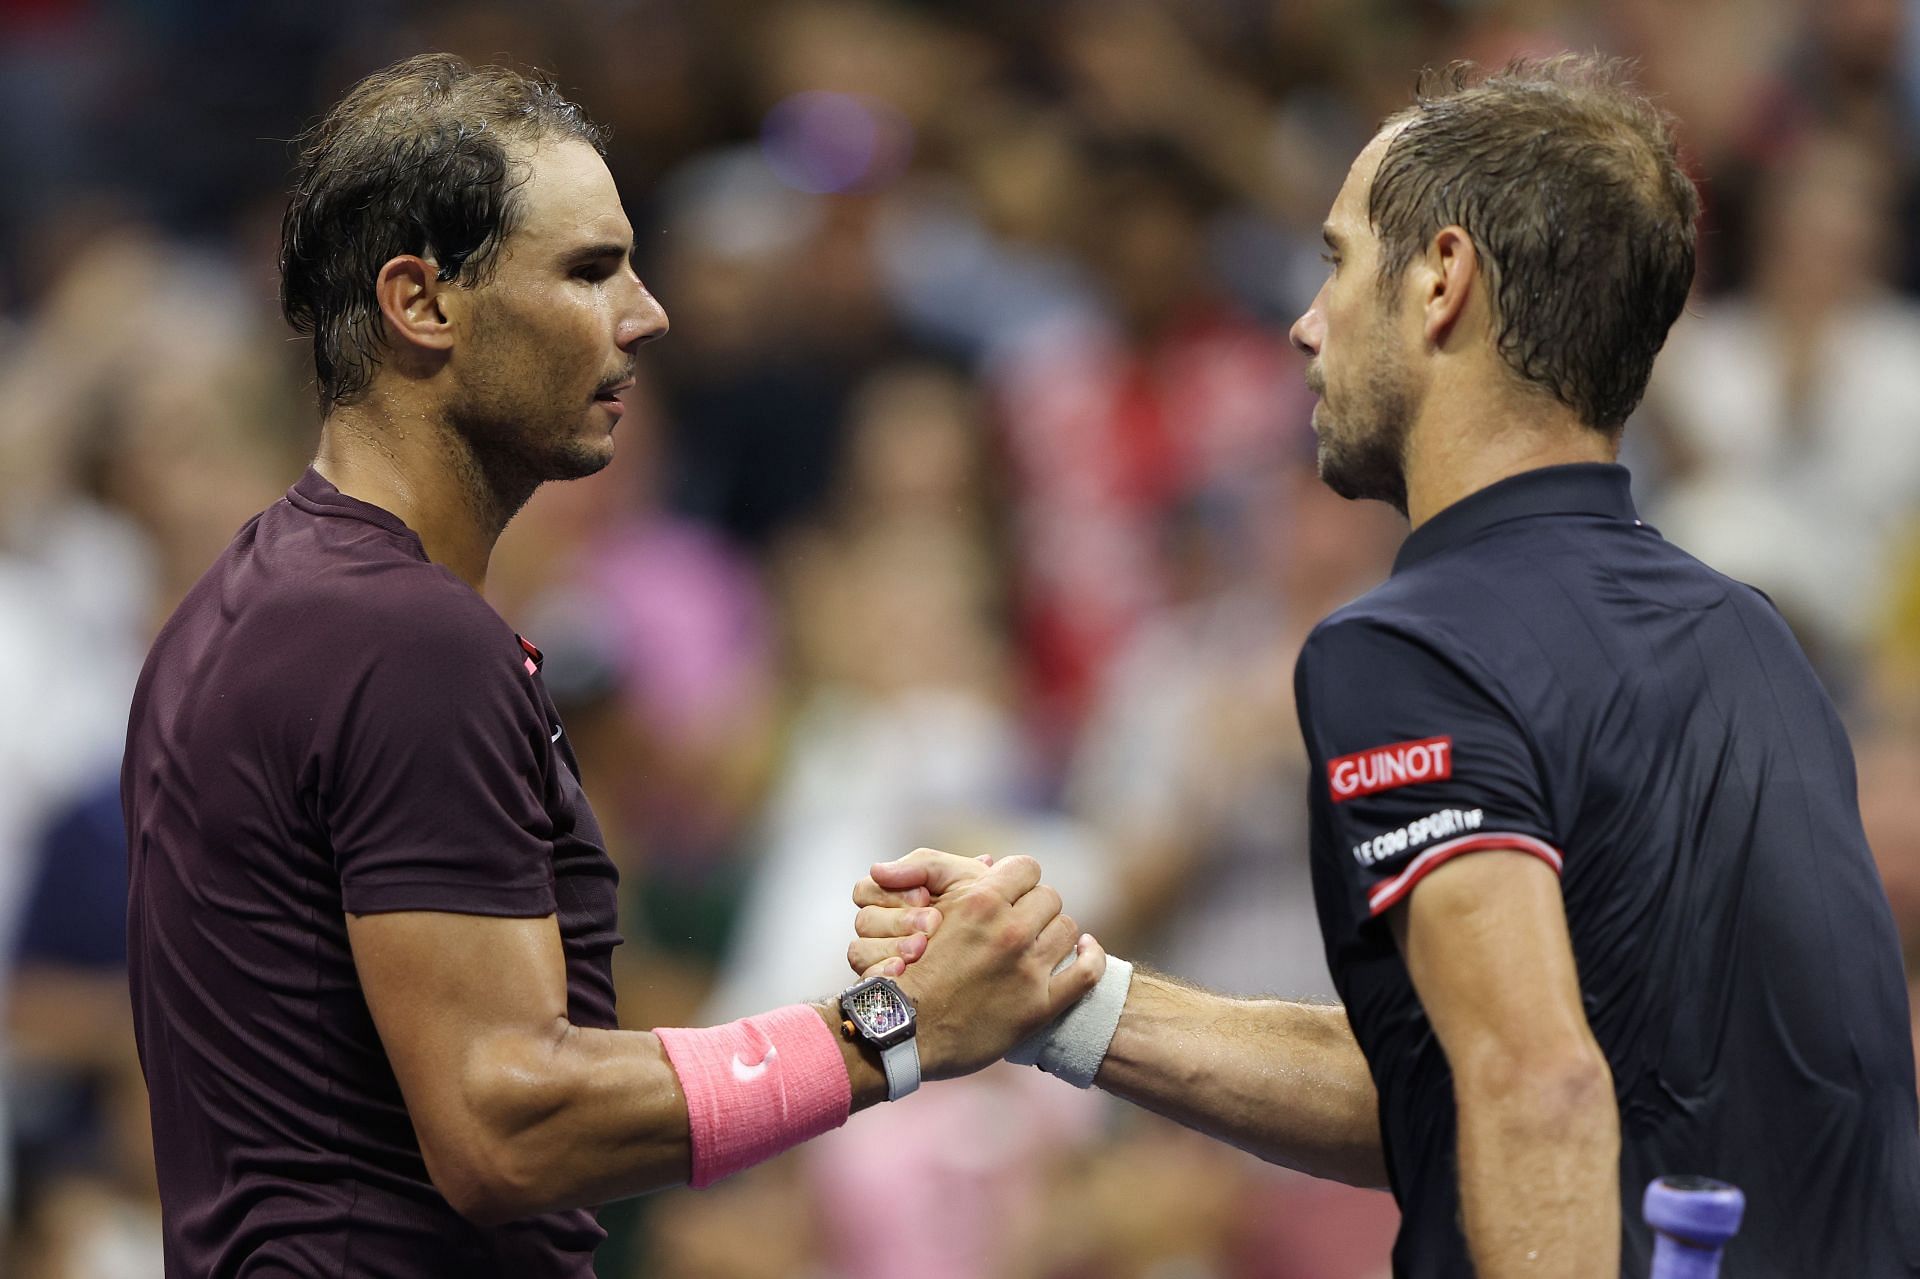 Rafael Nadal and Richard Gasquet pictured at the 2022 US Open